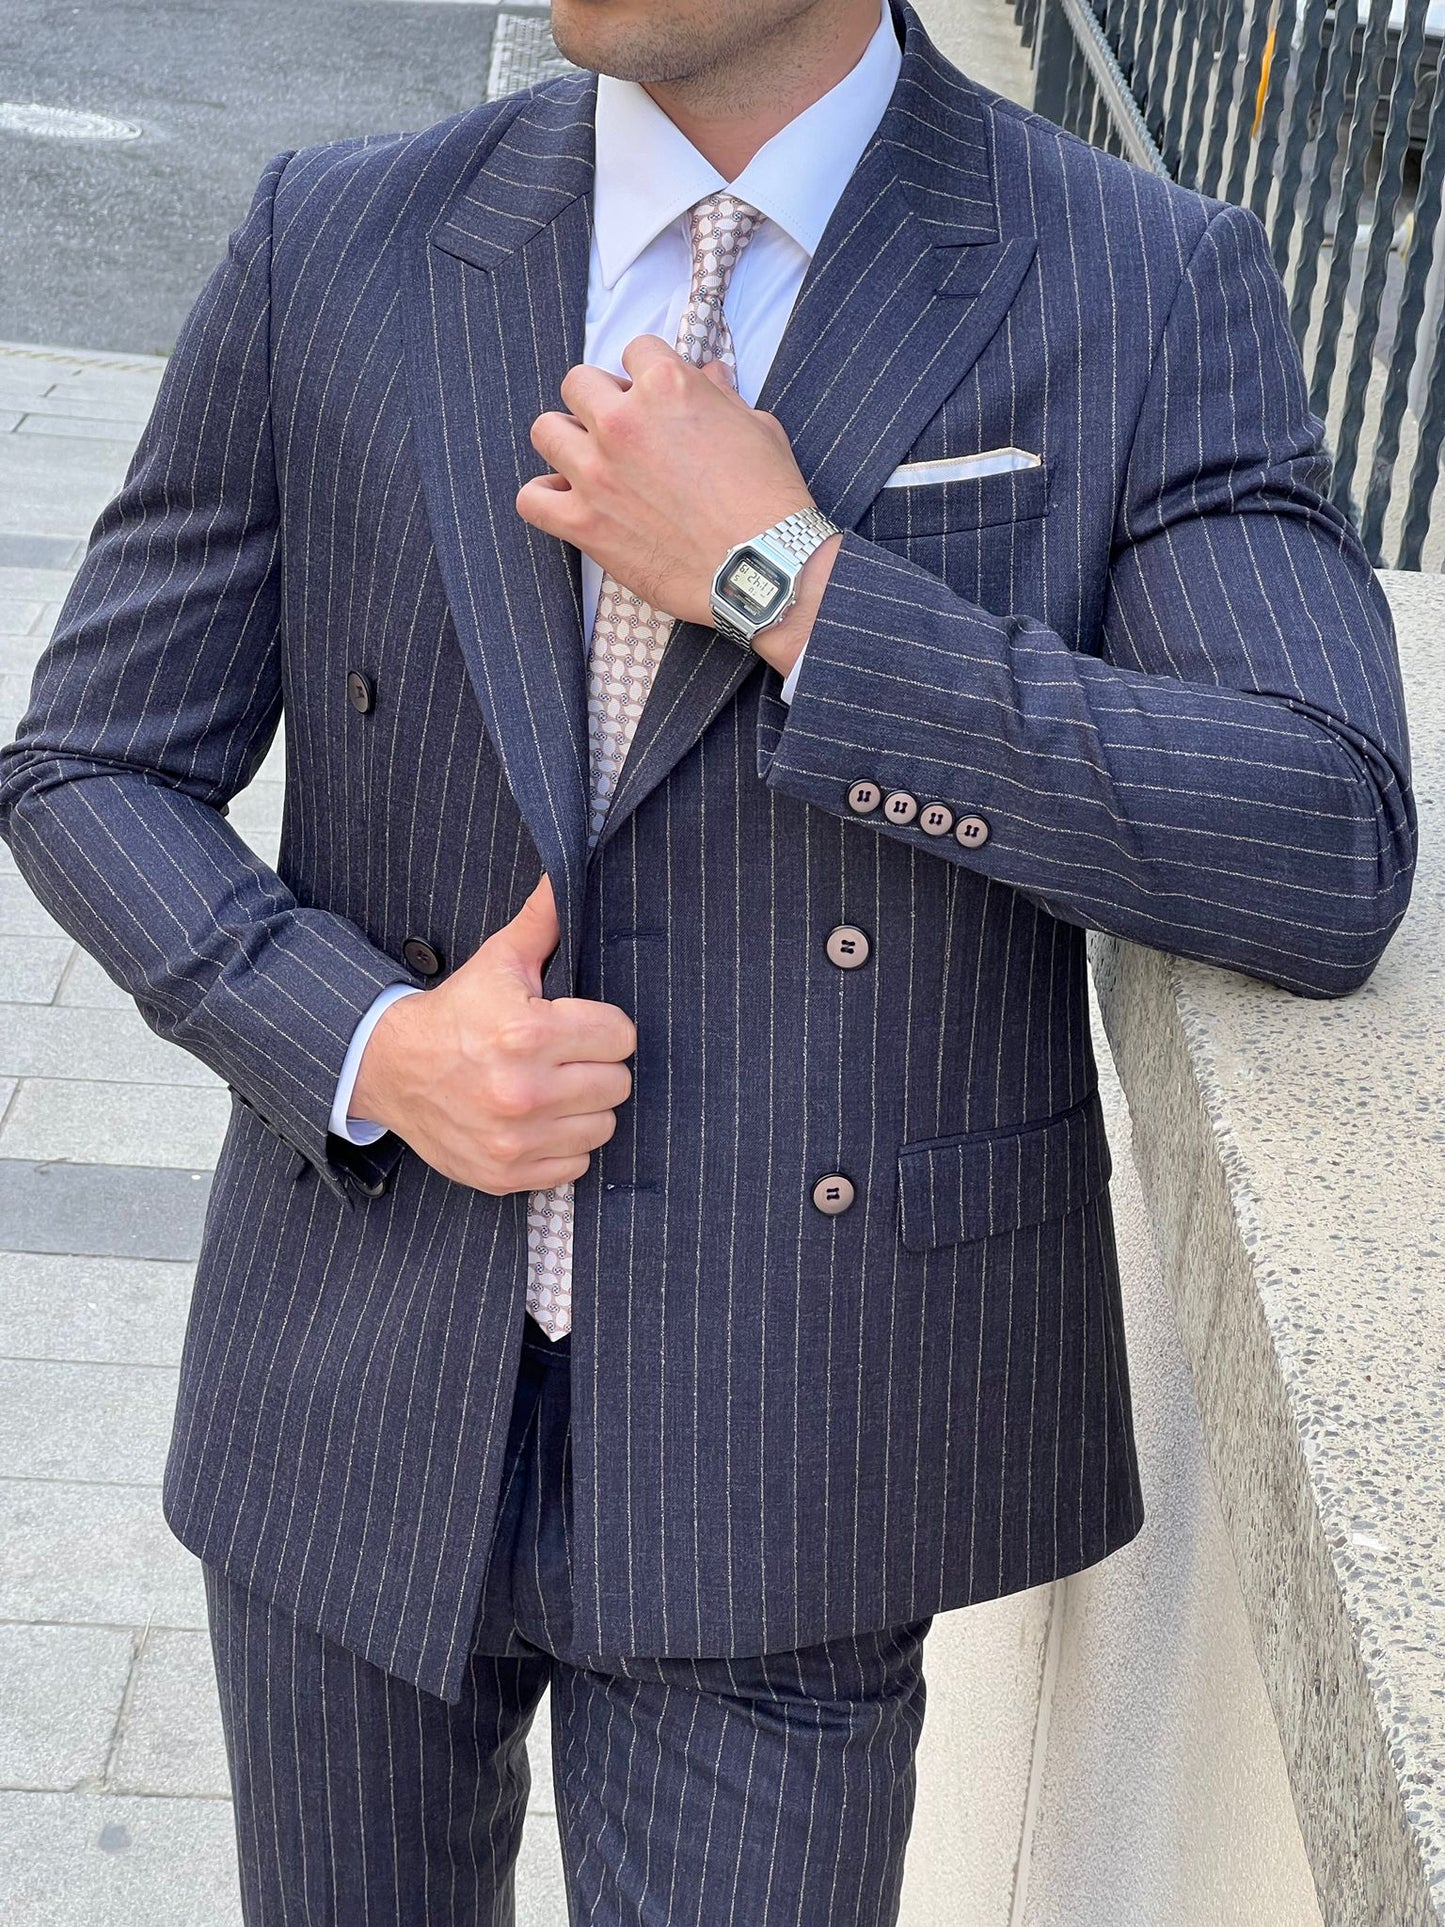 Conan Navy Blue Striped Double-Breasted Wool Suit